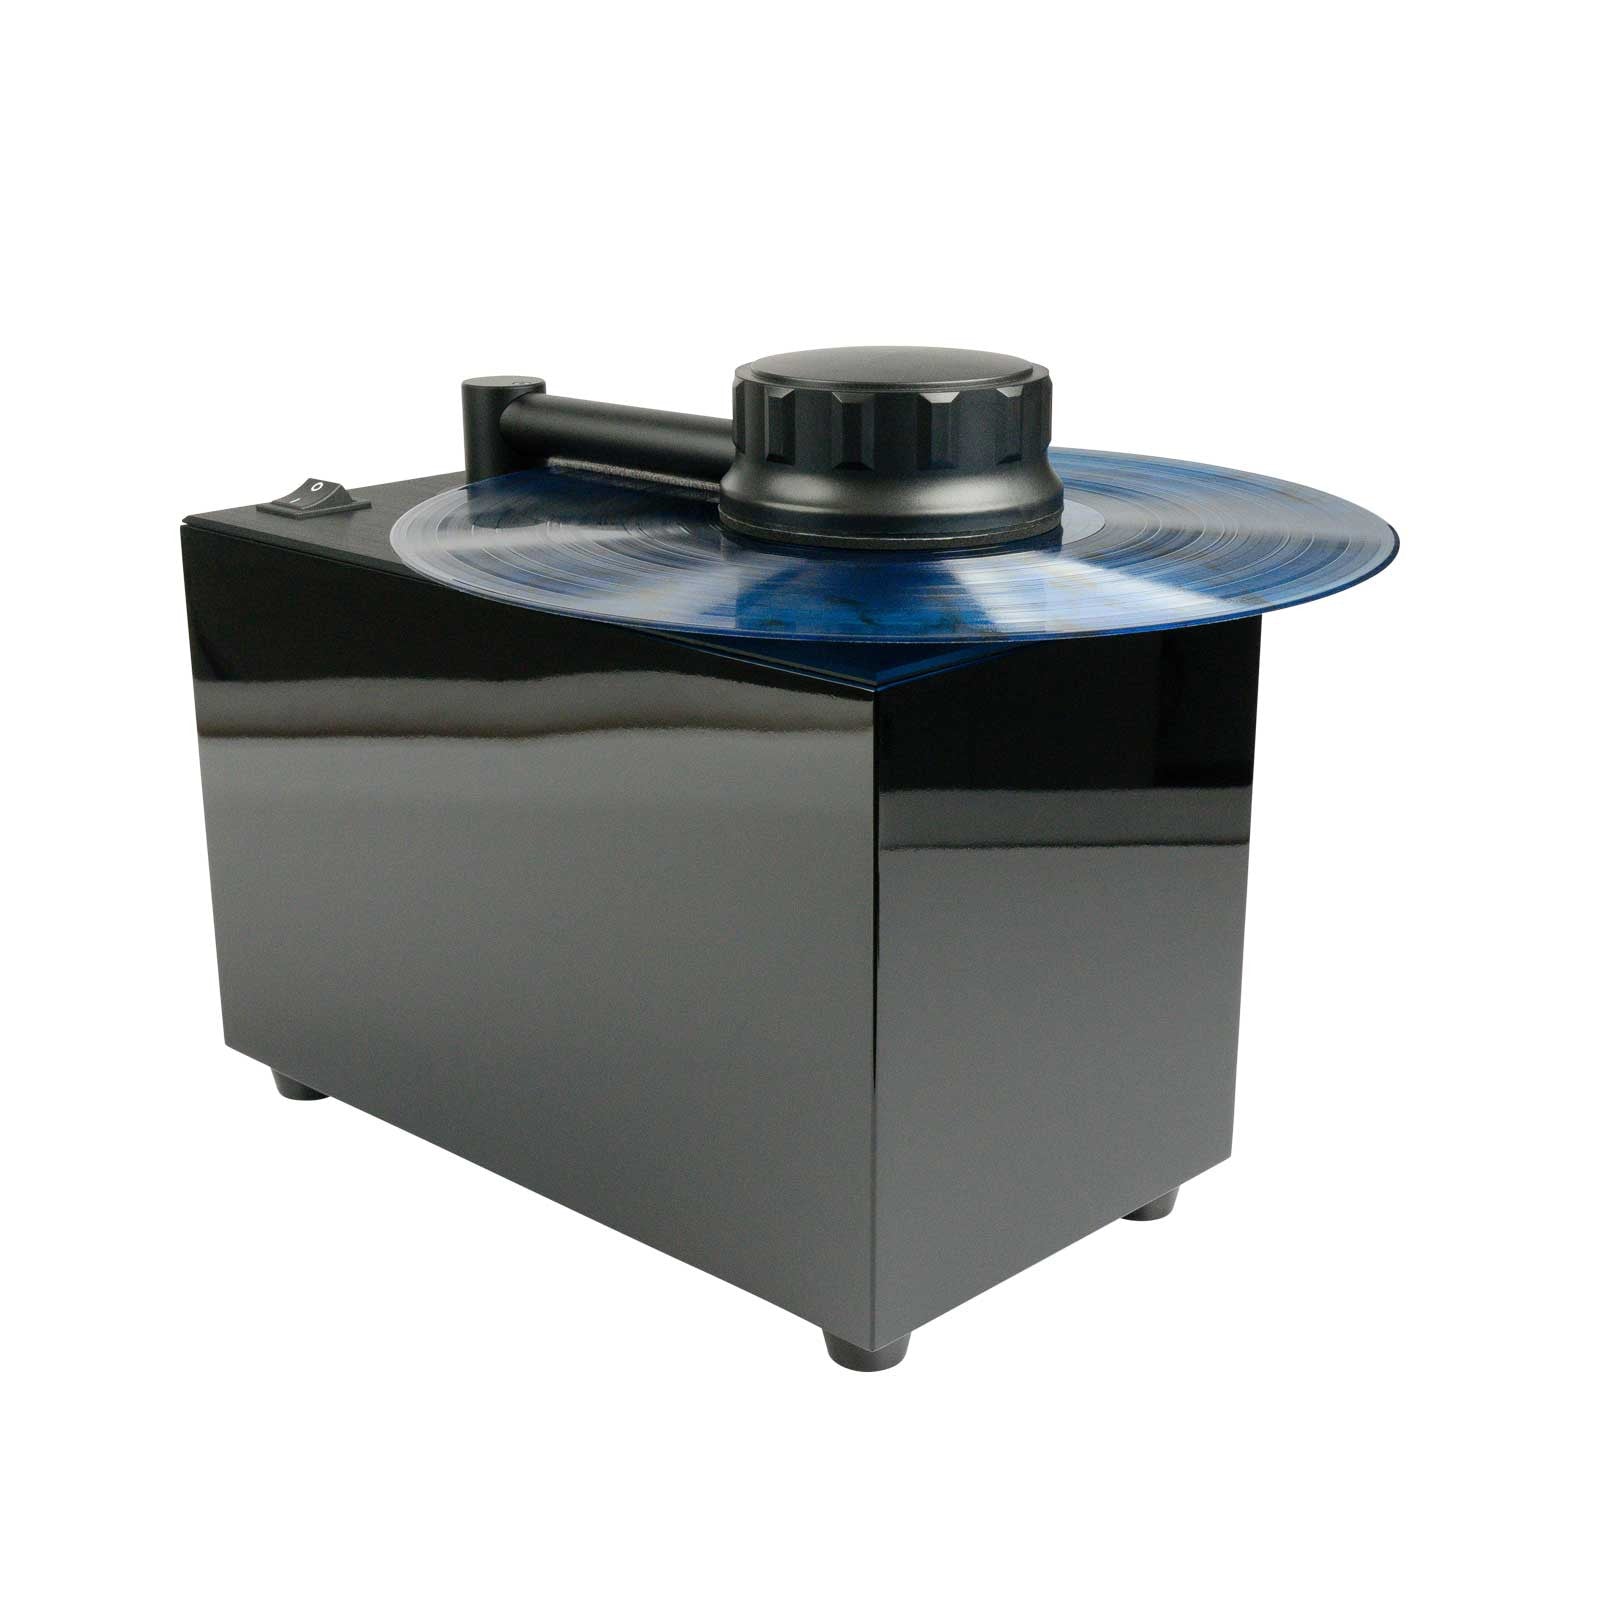 Record Doctor X Record Cleaning Machine (available to demo)